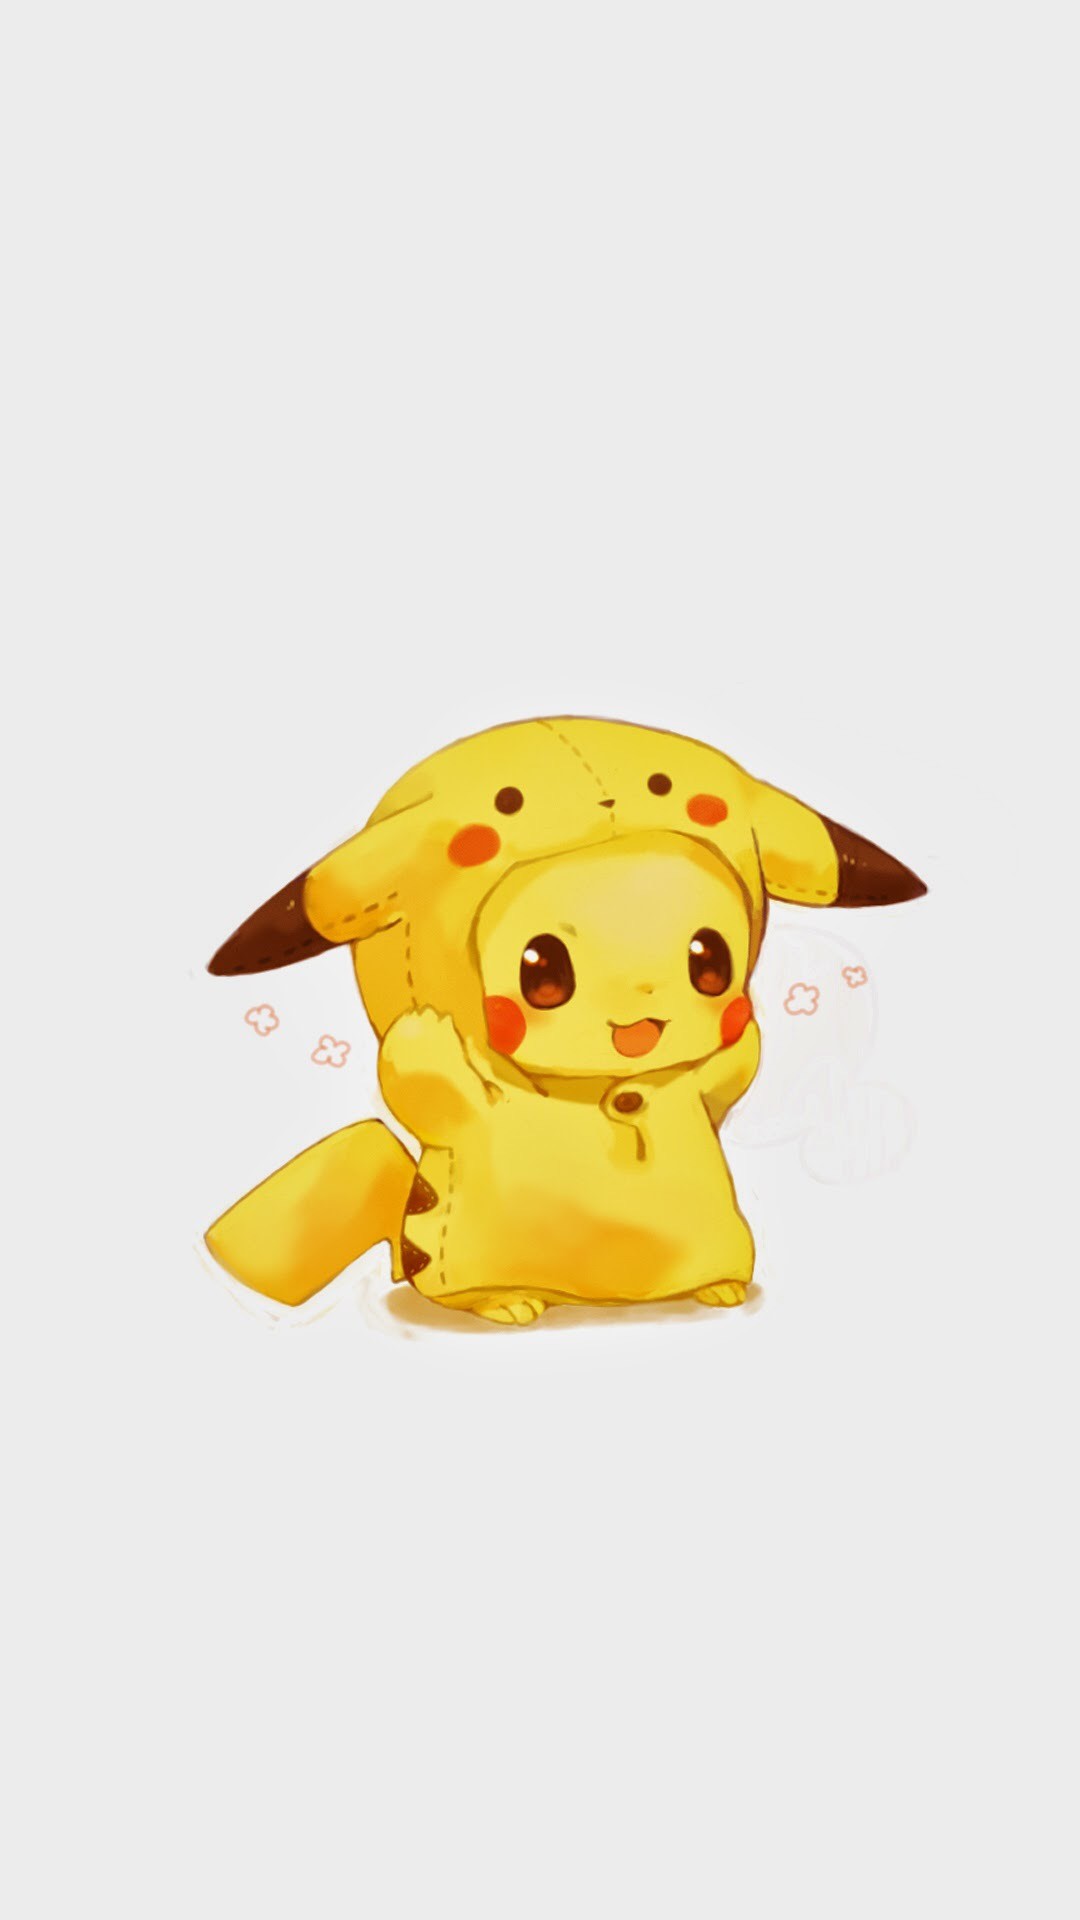 192 Pikachu Wallpapers For Computer